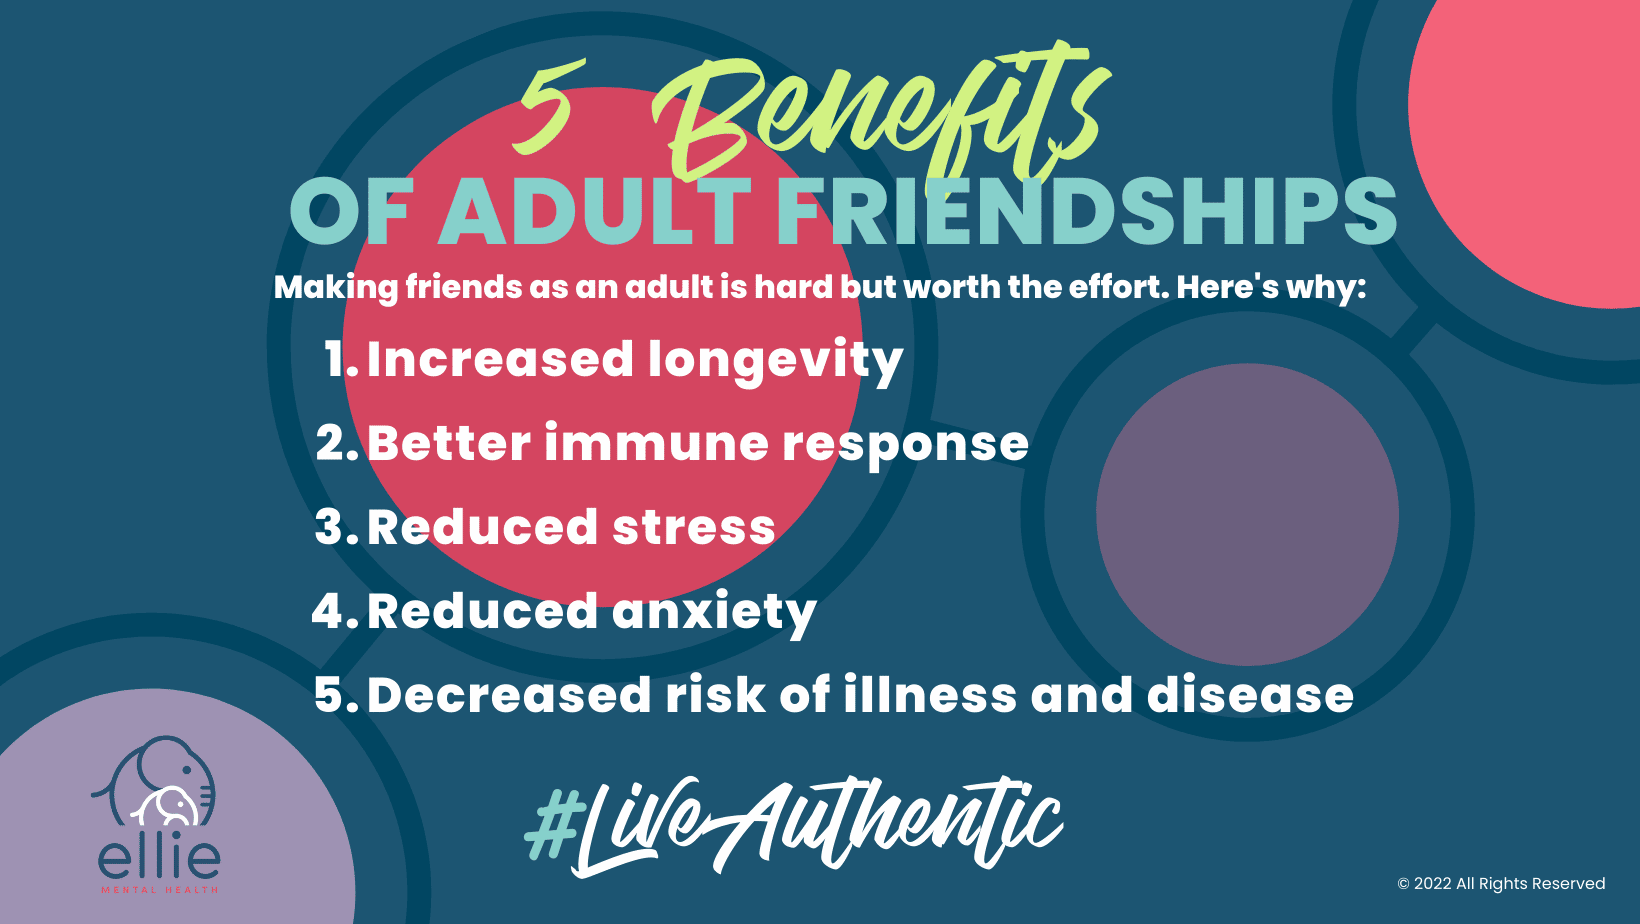 5 Benefits of Adult Friendships Infographic